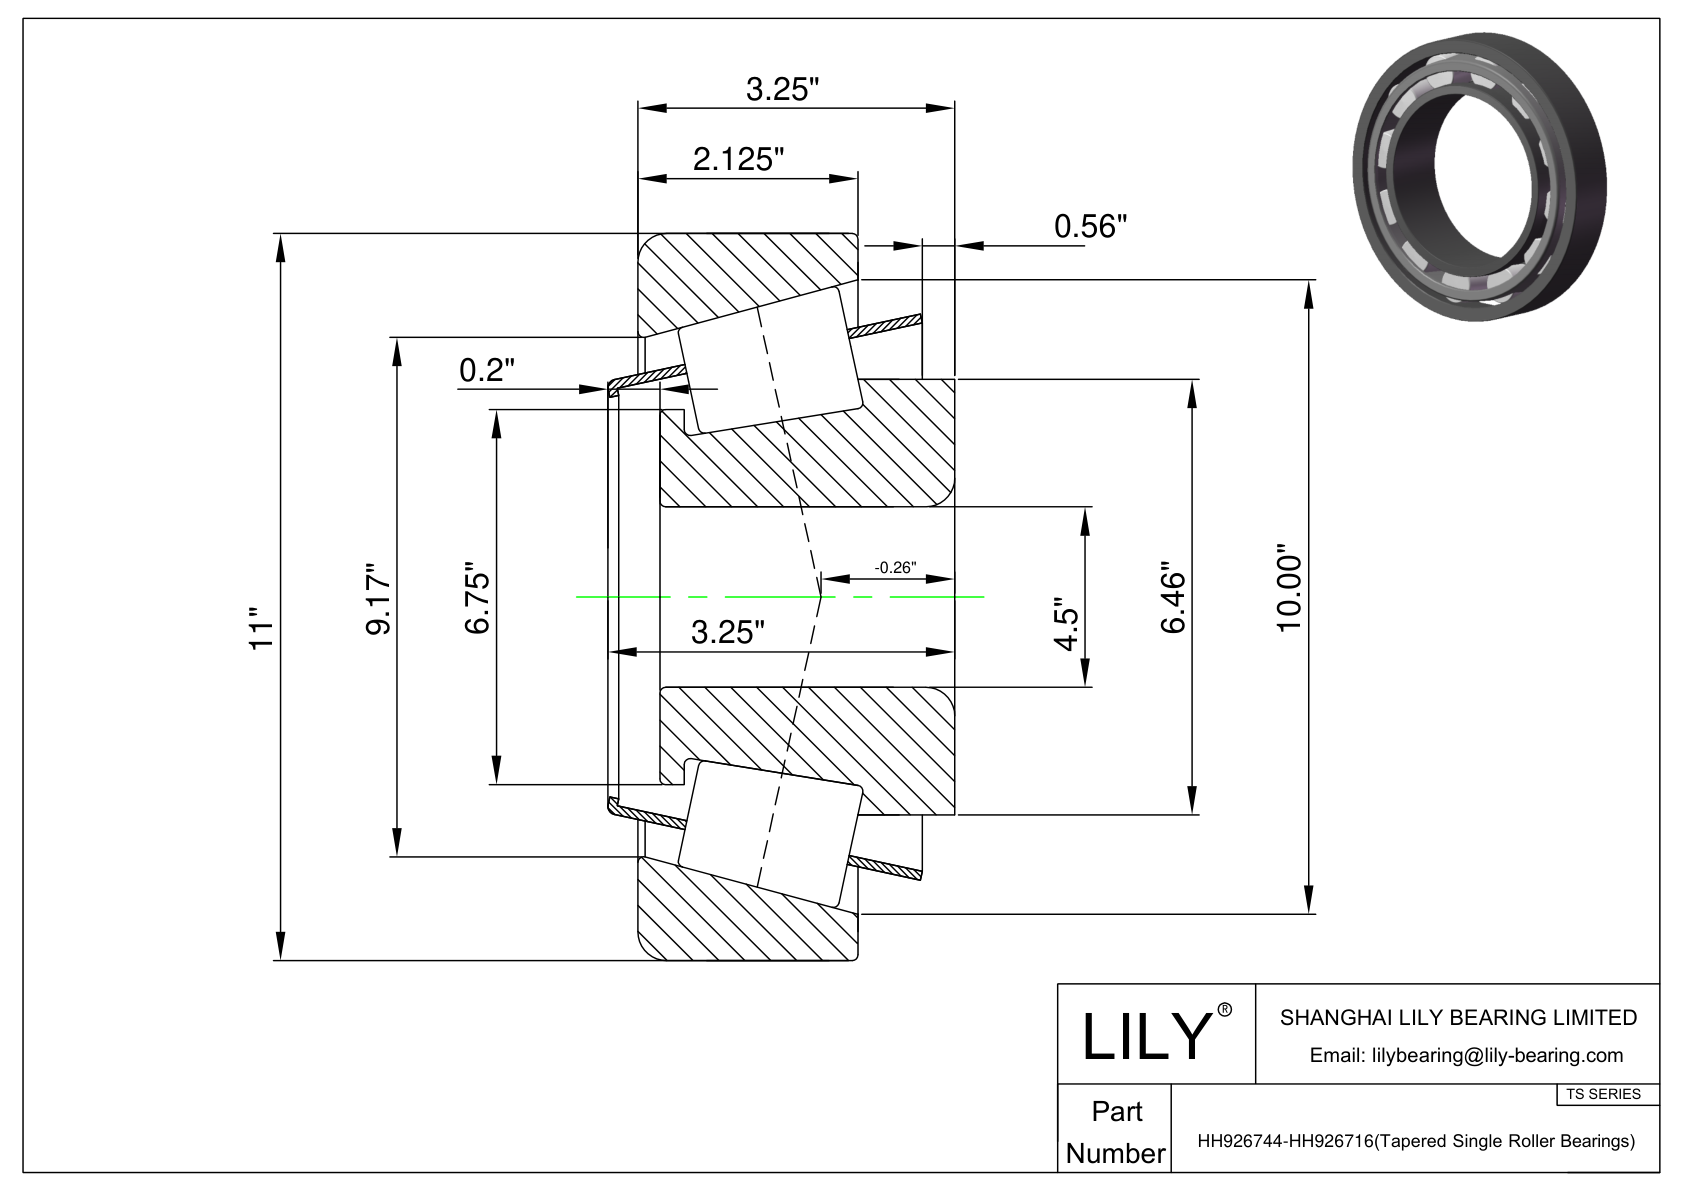 HH926744-HH926716 TS (Tapered Single Roller Bearings) (Imperial) cad drawing